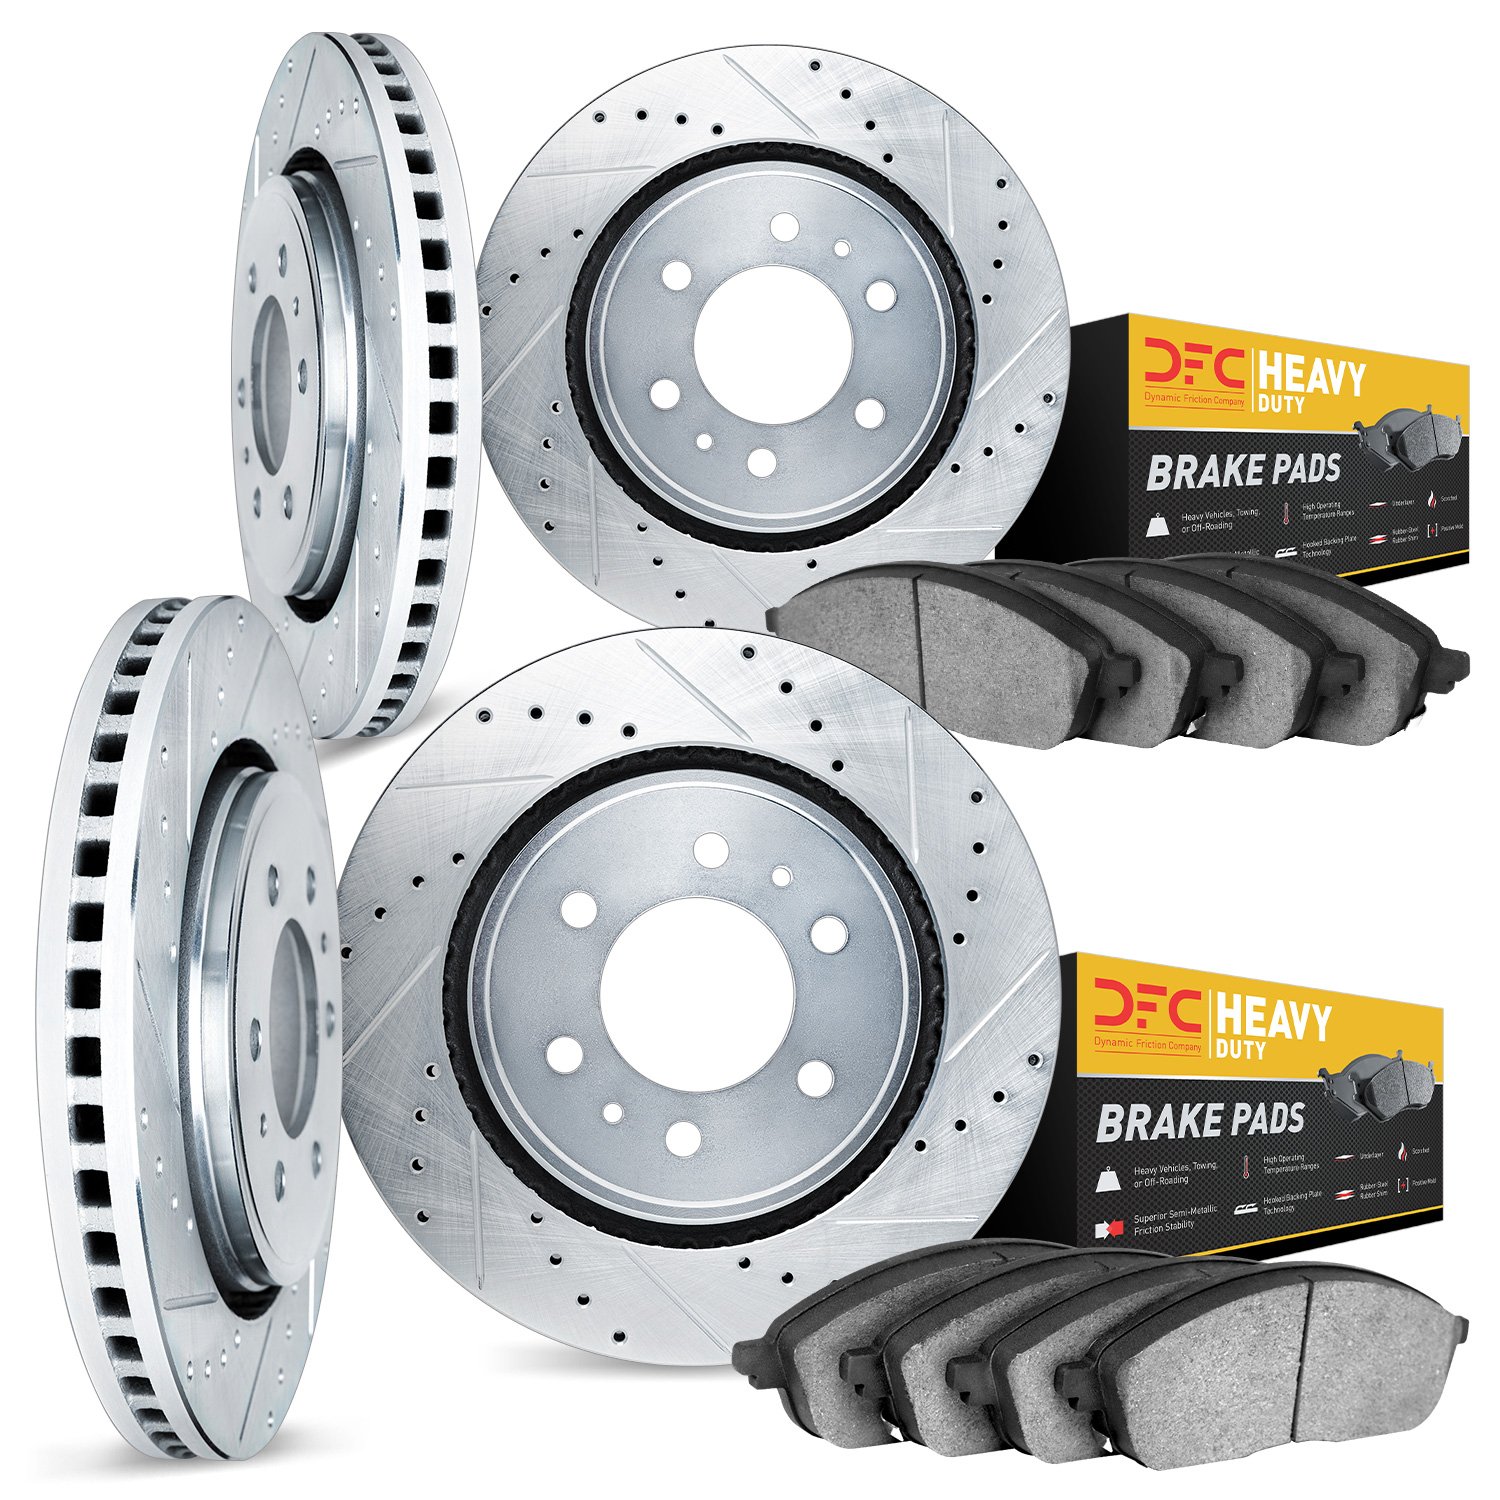 7204-48061 Drilled/Slotted Rotors w/Heavy-Duty Brake Pads Kit [Silver], 1999-2007 GM, Position: Front and Rear